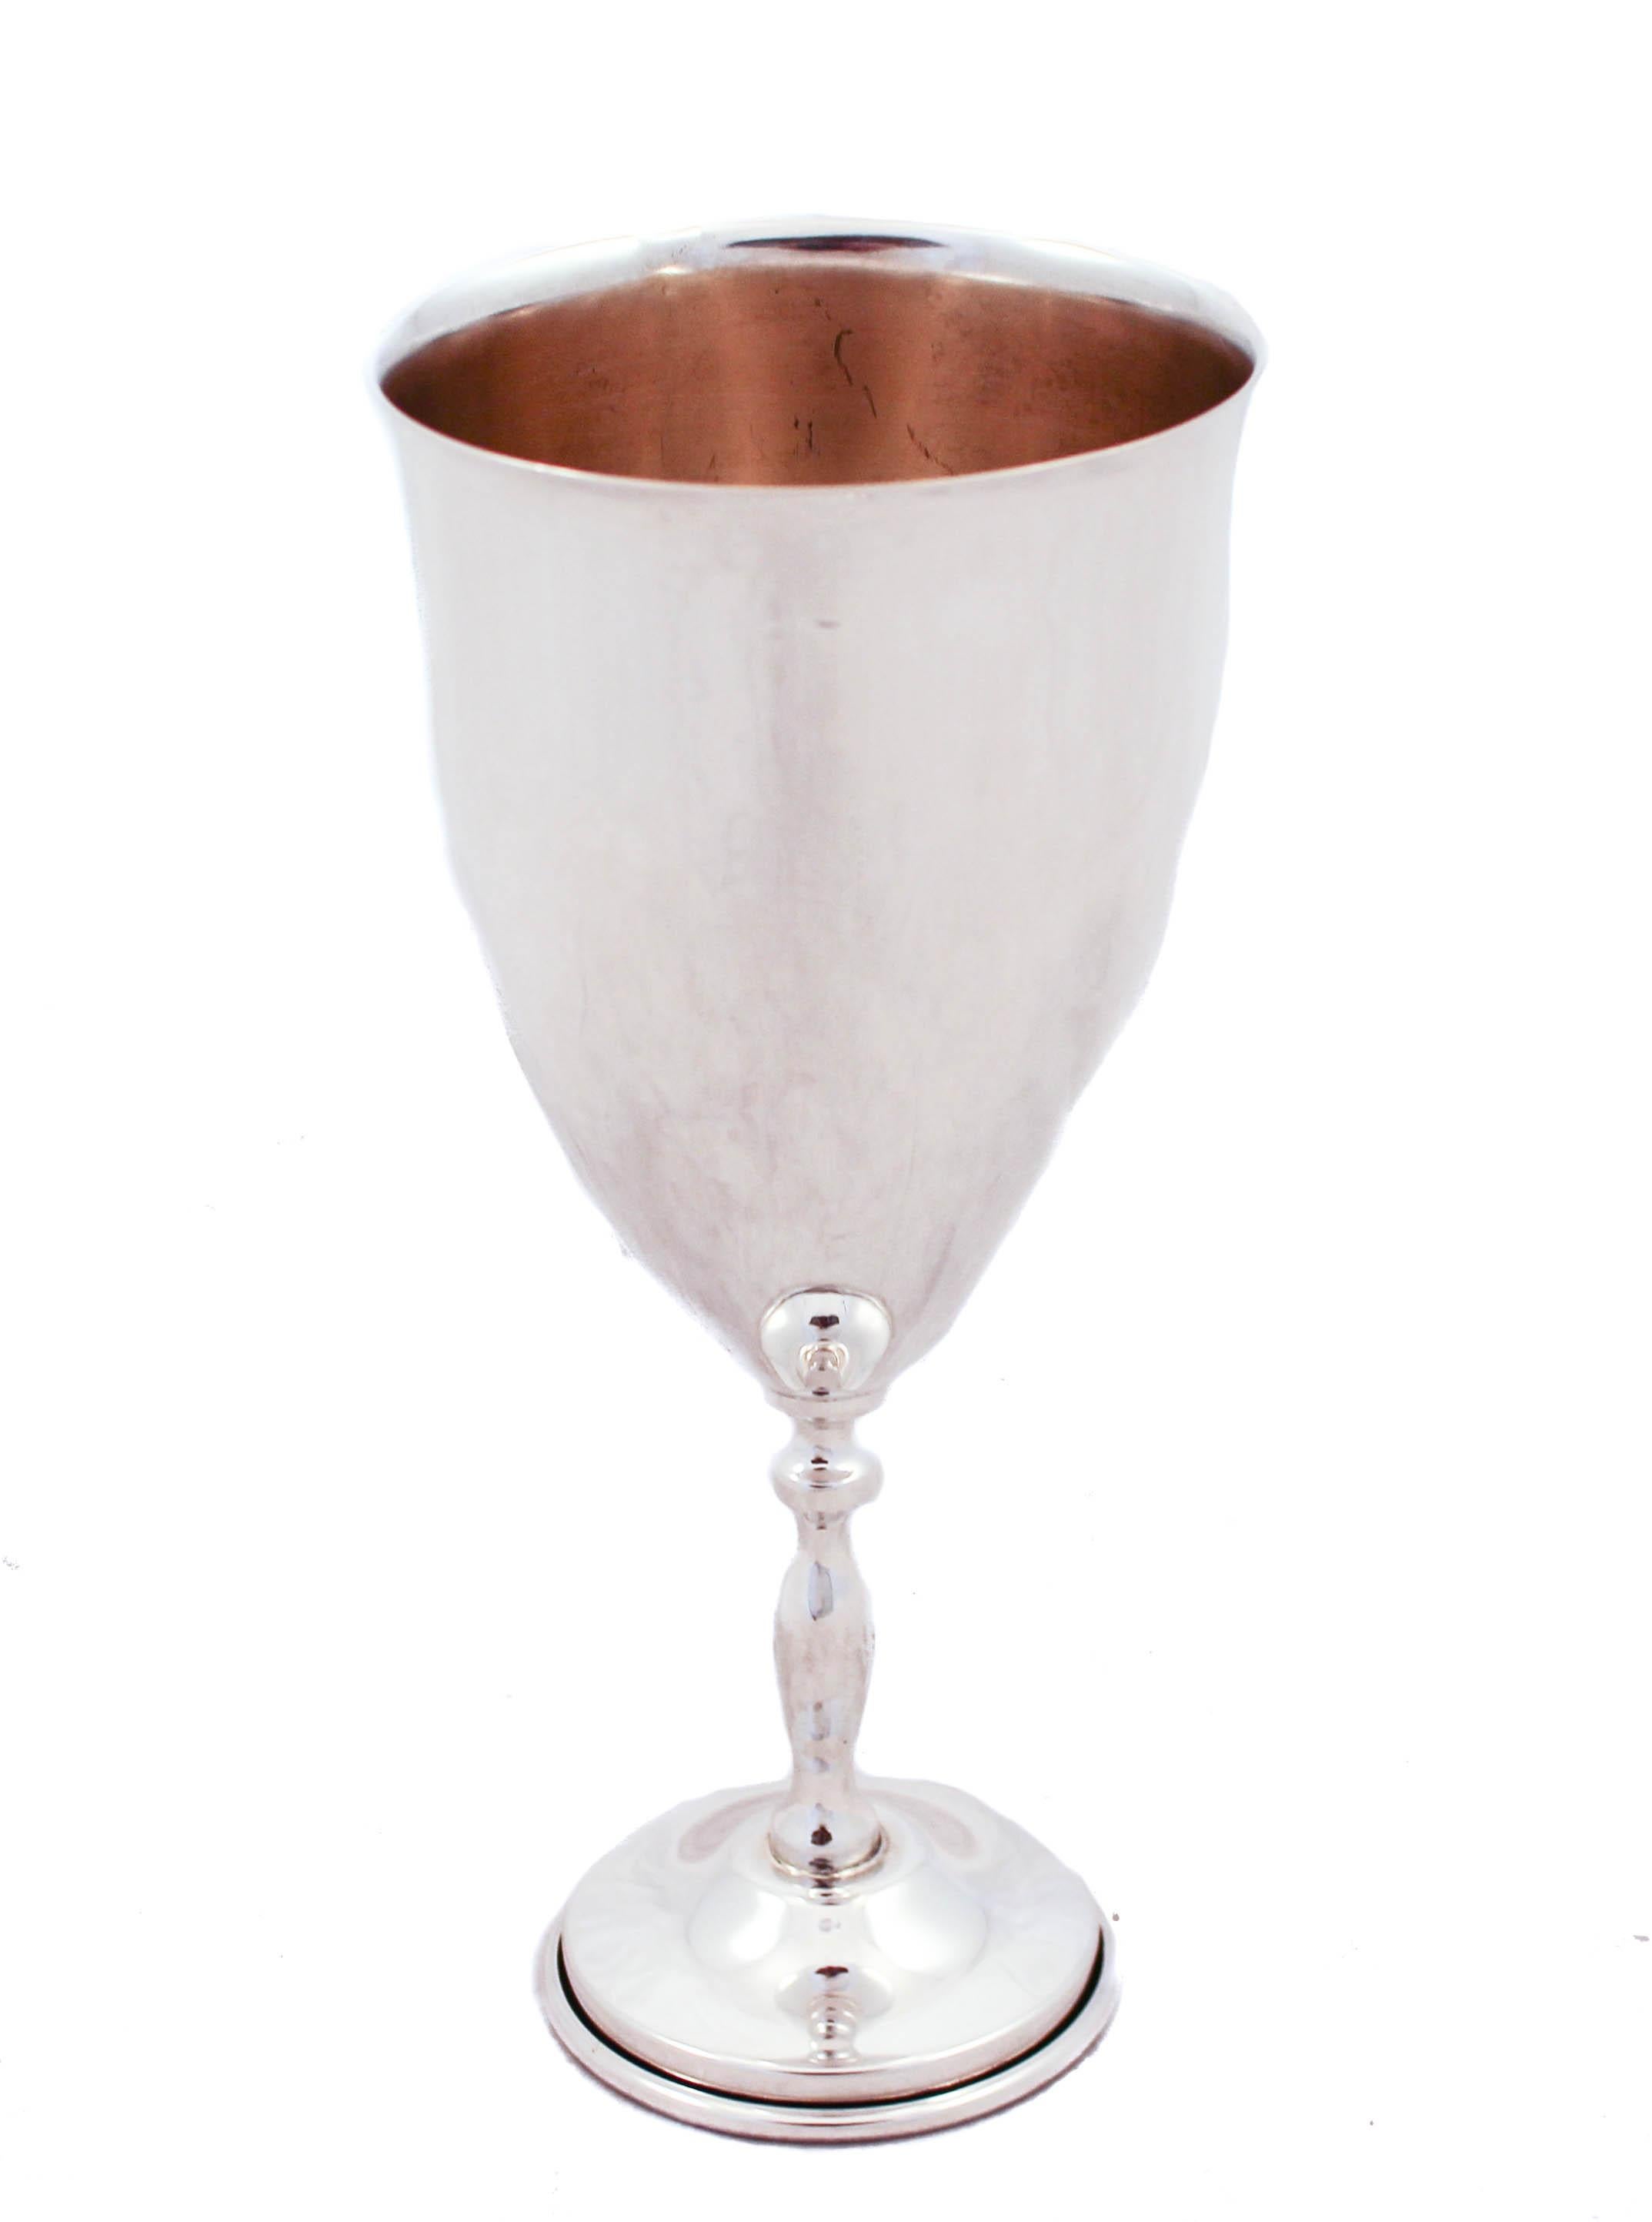 Mexican, sterling, excellent, 7” x 3”, 1960-69, unknown Juvento Lopez Reyes, $485
Being offered is a sterling silver goblet. Handmade in Mexico in the 1960’s, it is very simple and understated. The cup portion has a subtle curve that gives it a